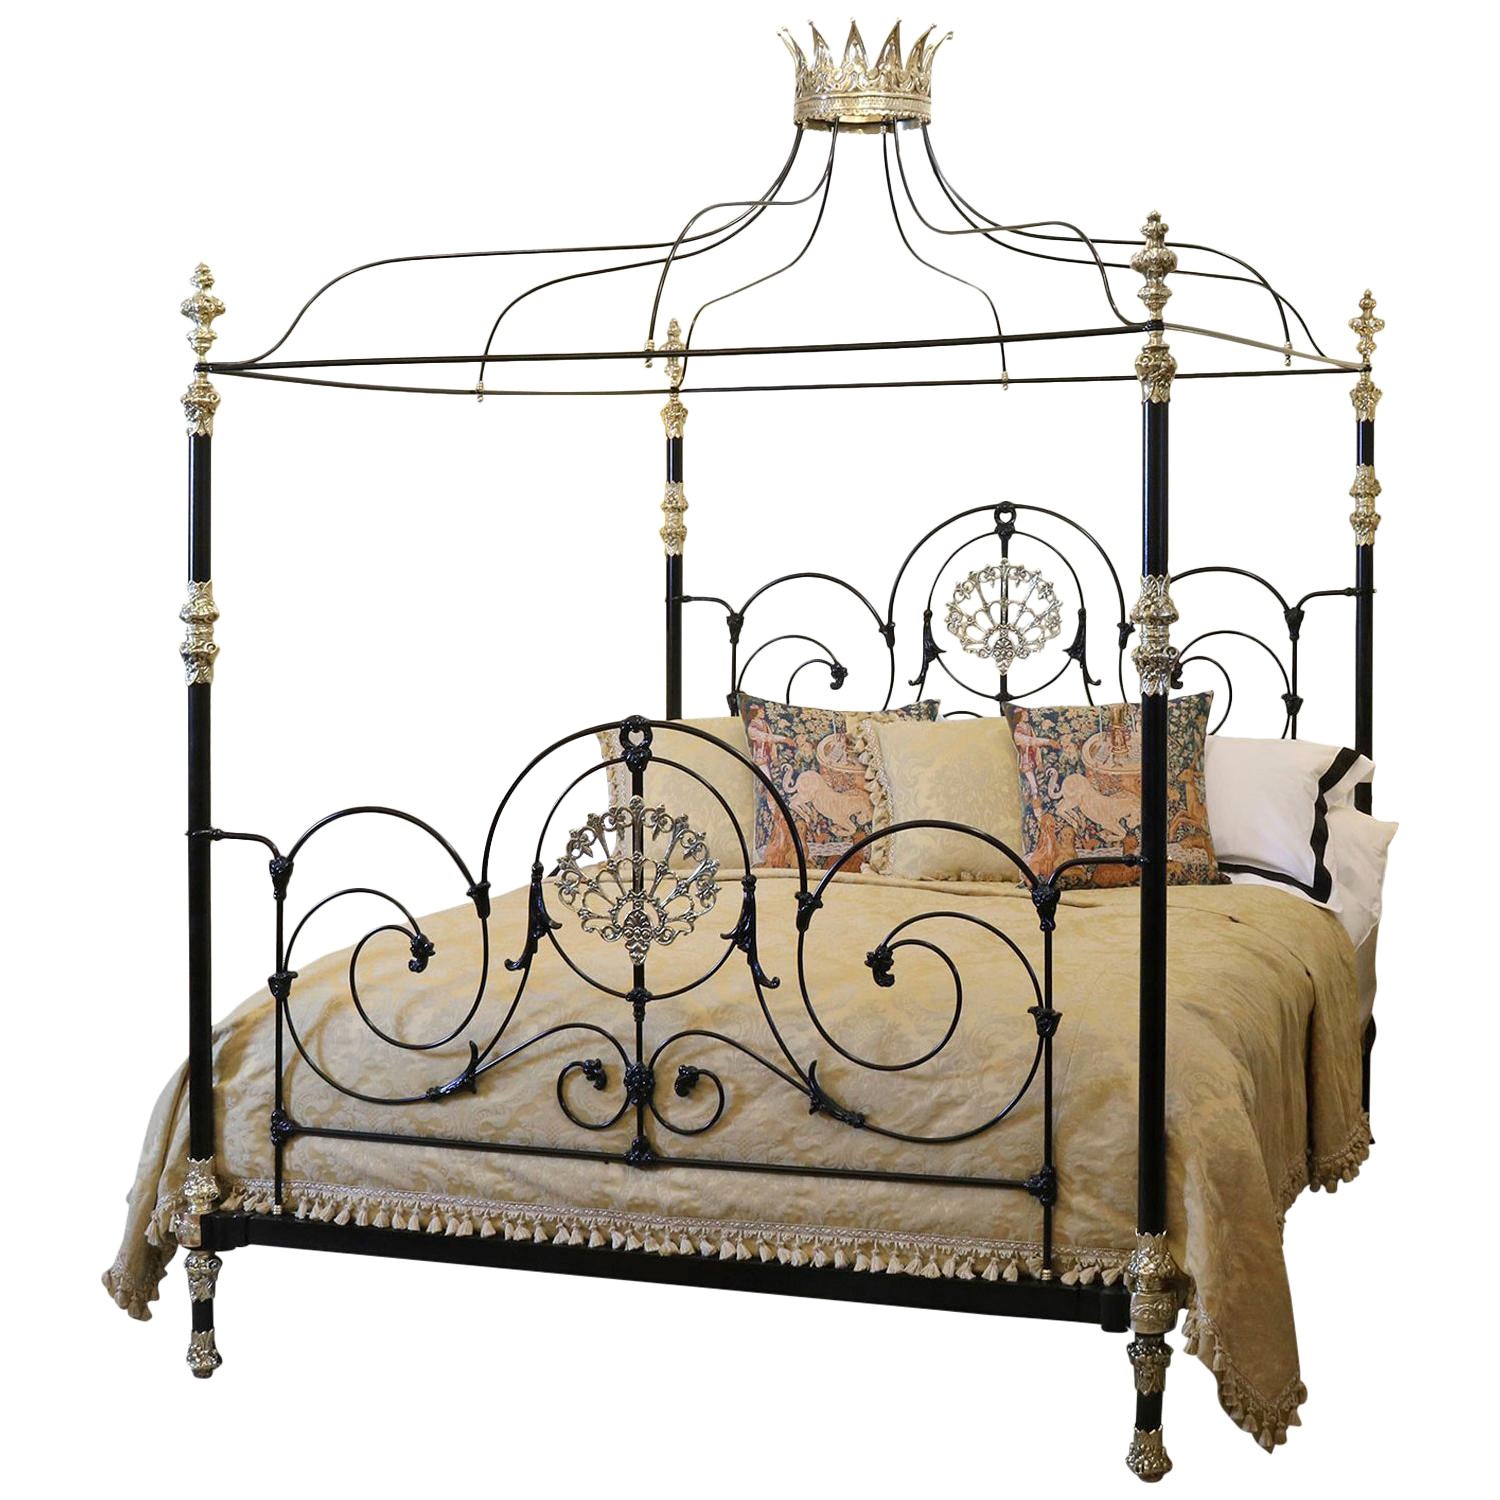 Six Foot Wide Alhambra Poster Bed For Sale